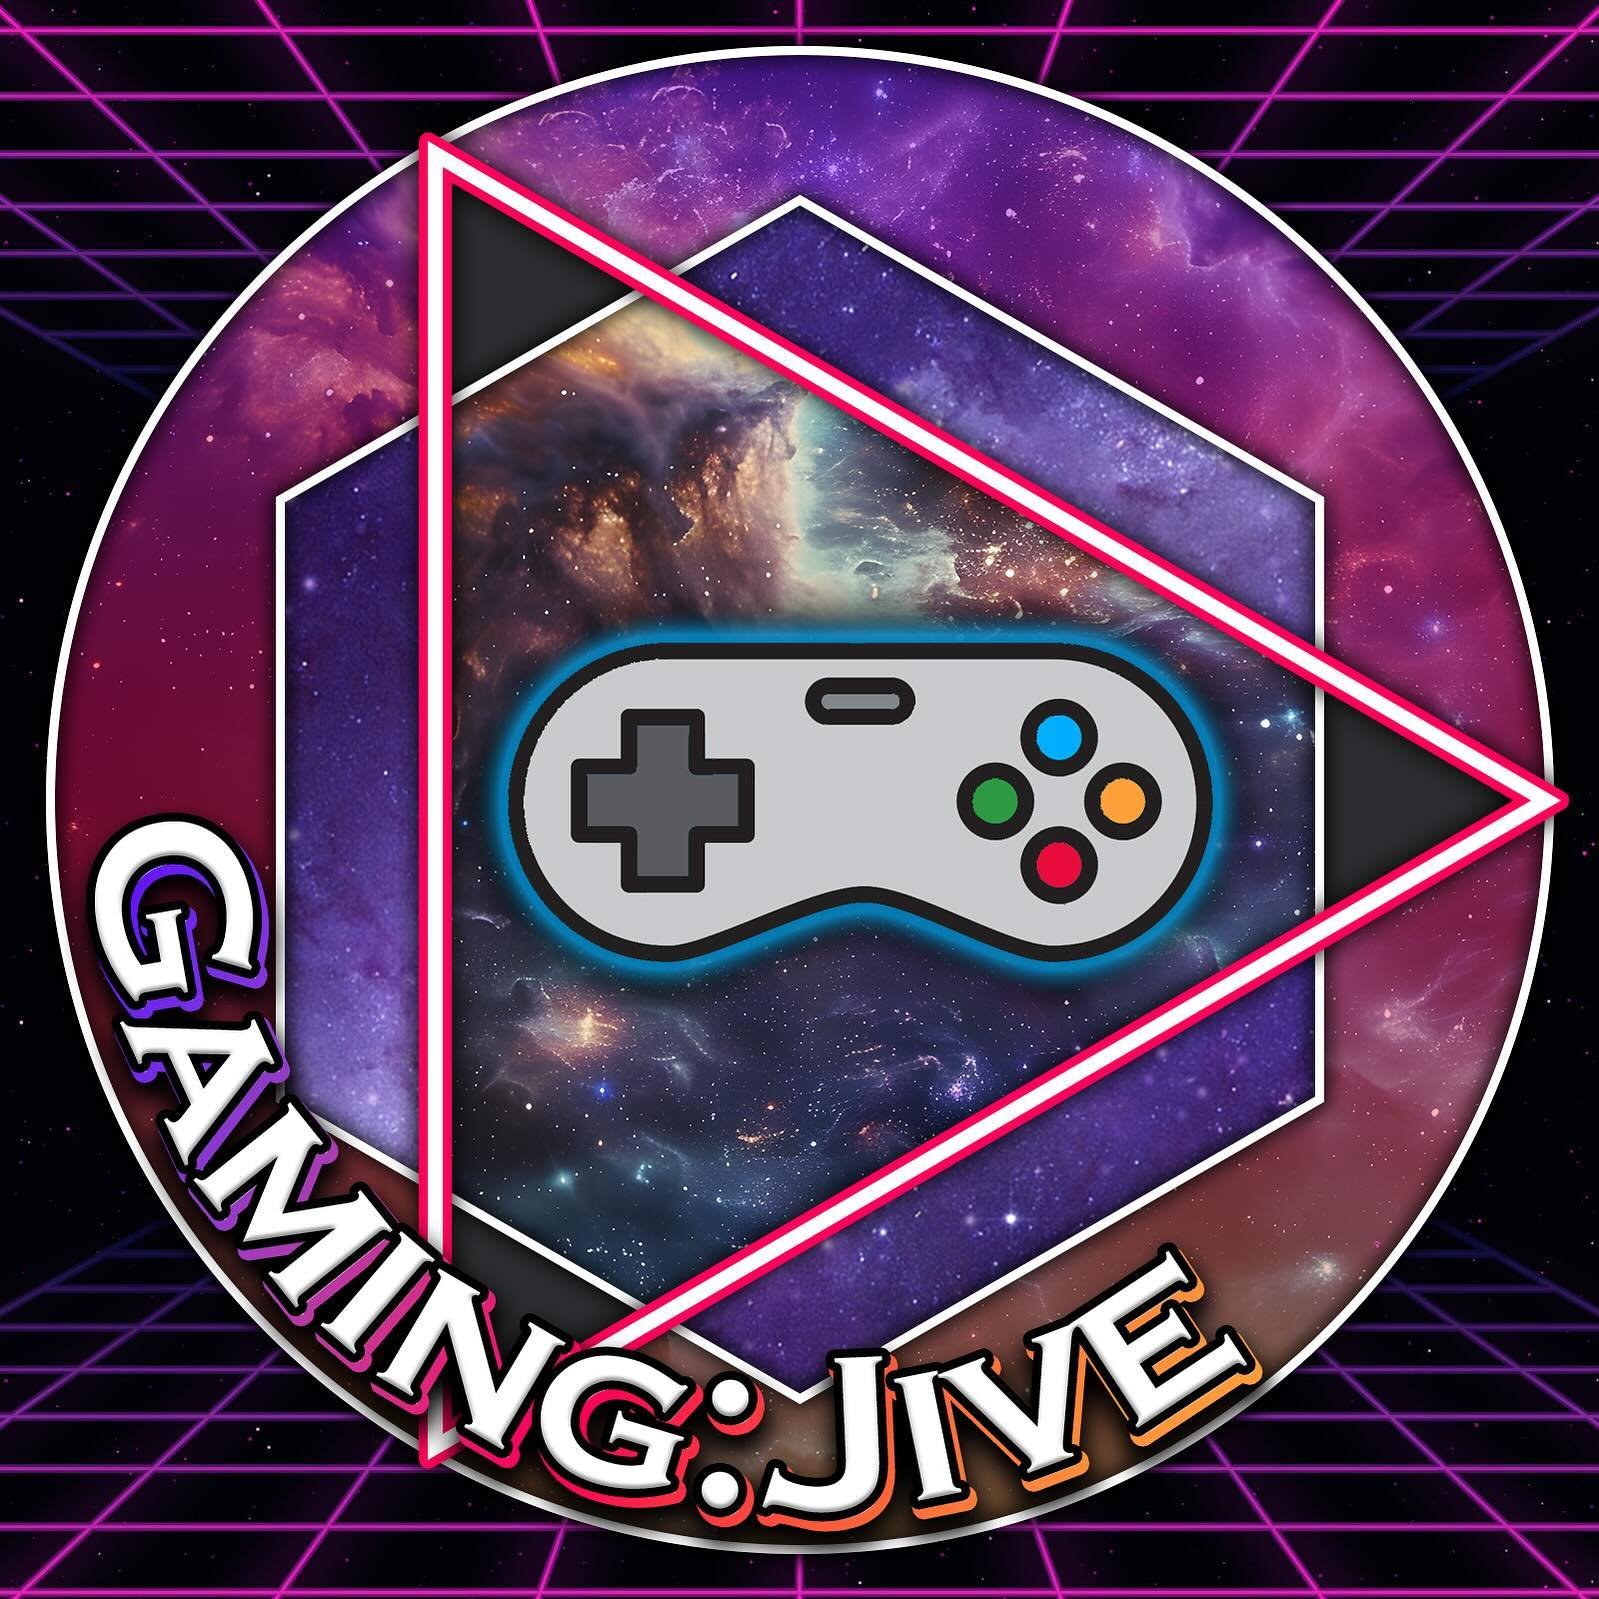 A new thing arriving tonight, Gaming:Jive, my newest YouTube channel for gaming content and livestreams! 
🌛Going live tonight at 7pm PST🌜
Starting the latest season and newest update for Diablo IV
.
.
.
#gaming #livestream #newchannel #gaminglife #